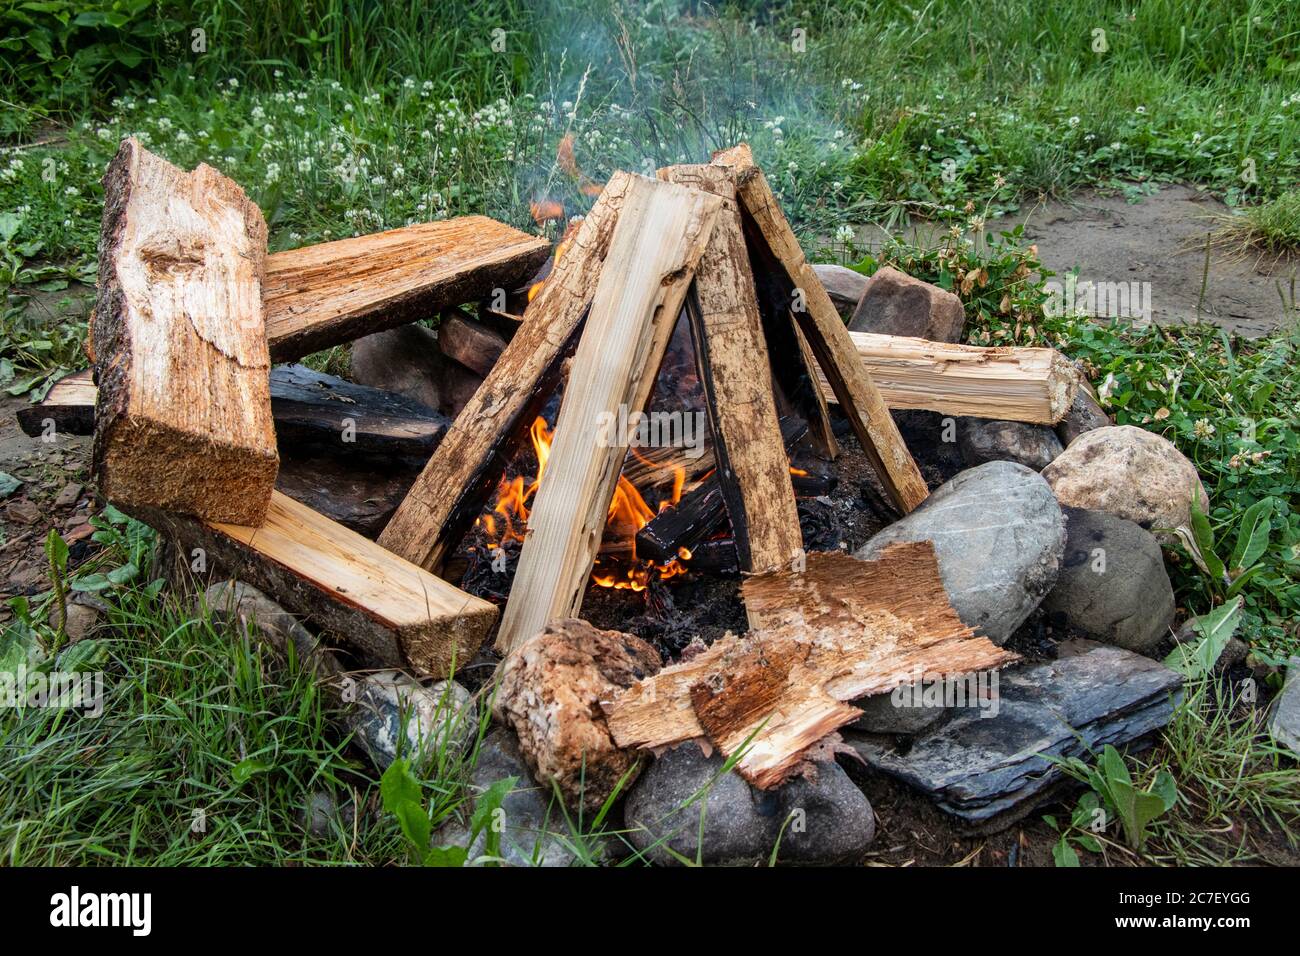 Drying wet wood logs around a campfire after rain shower Stock Photo